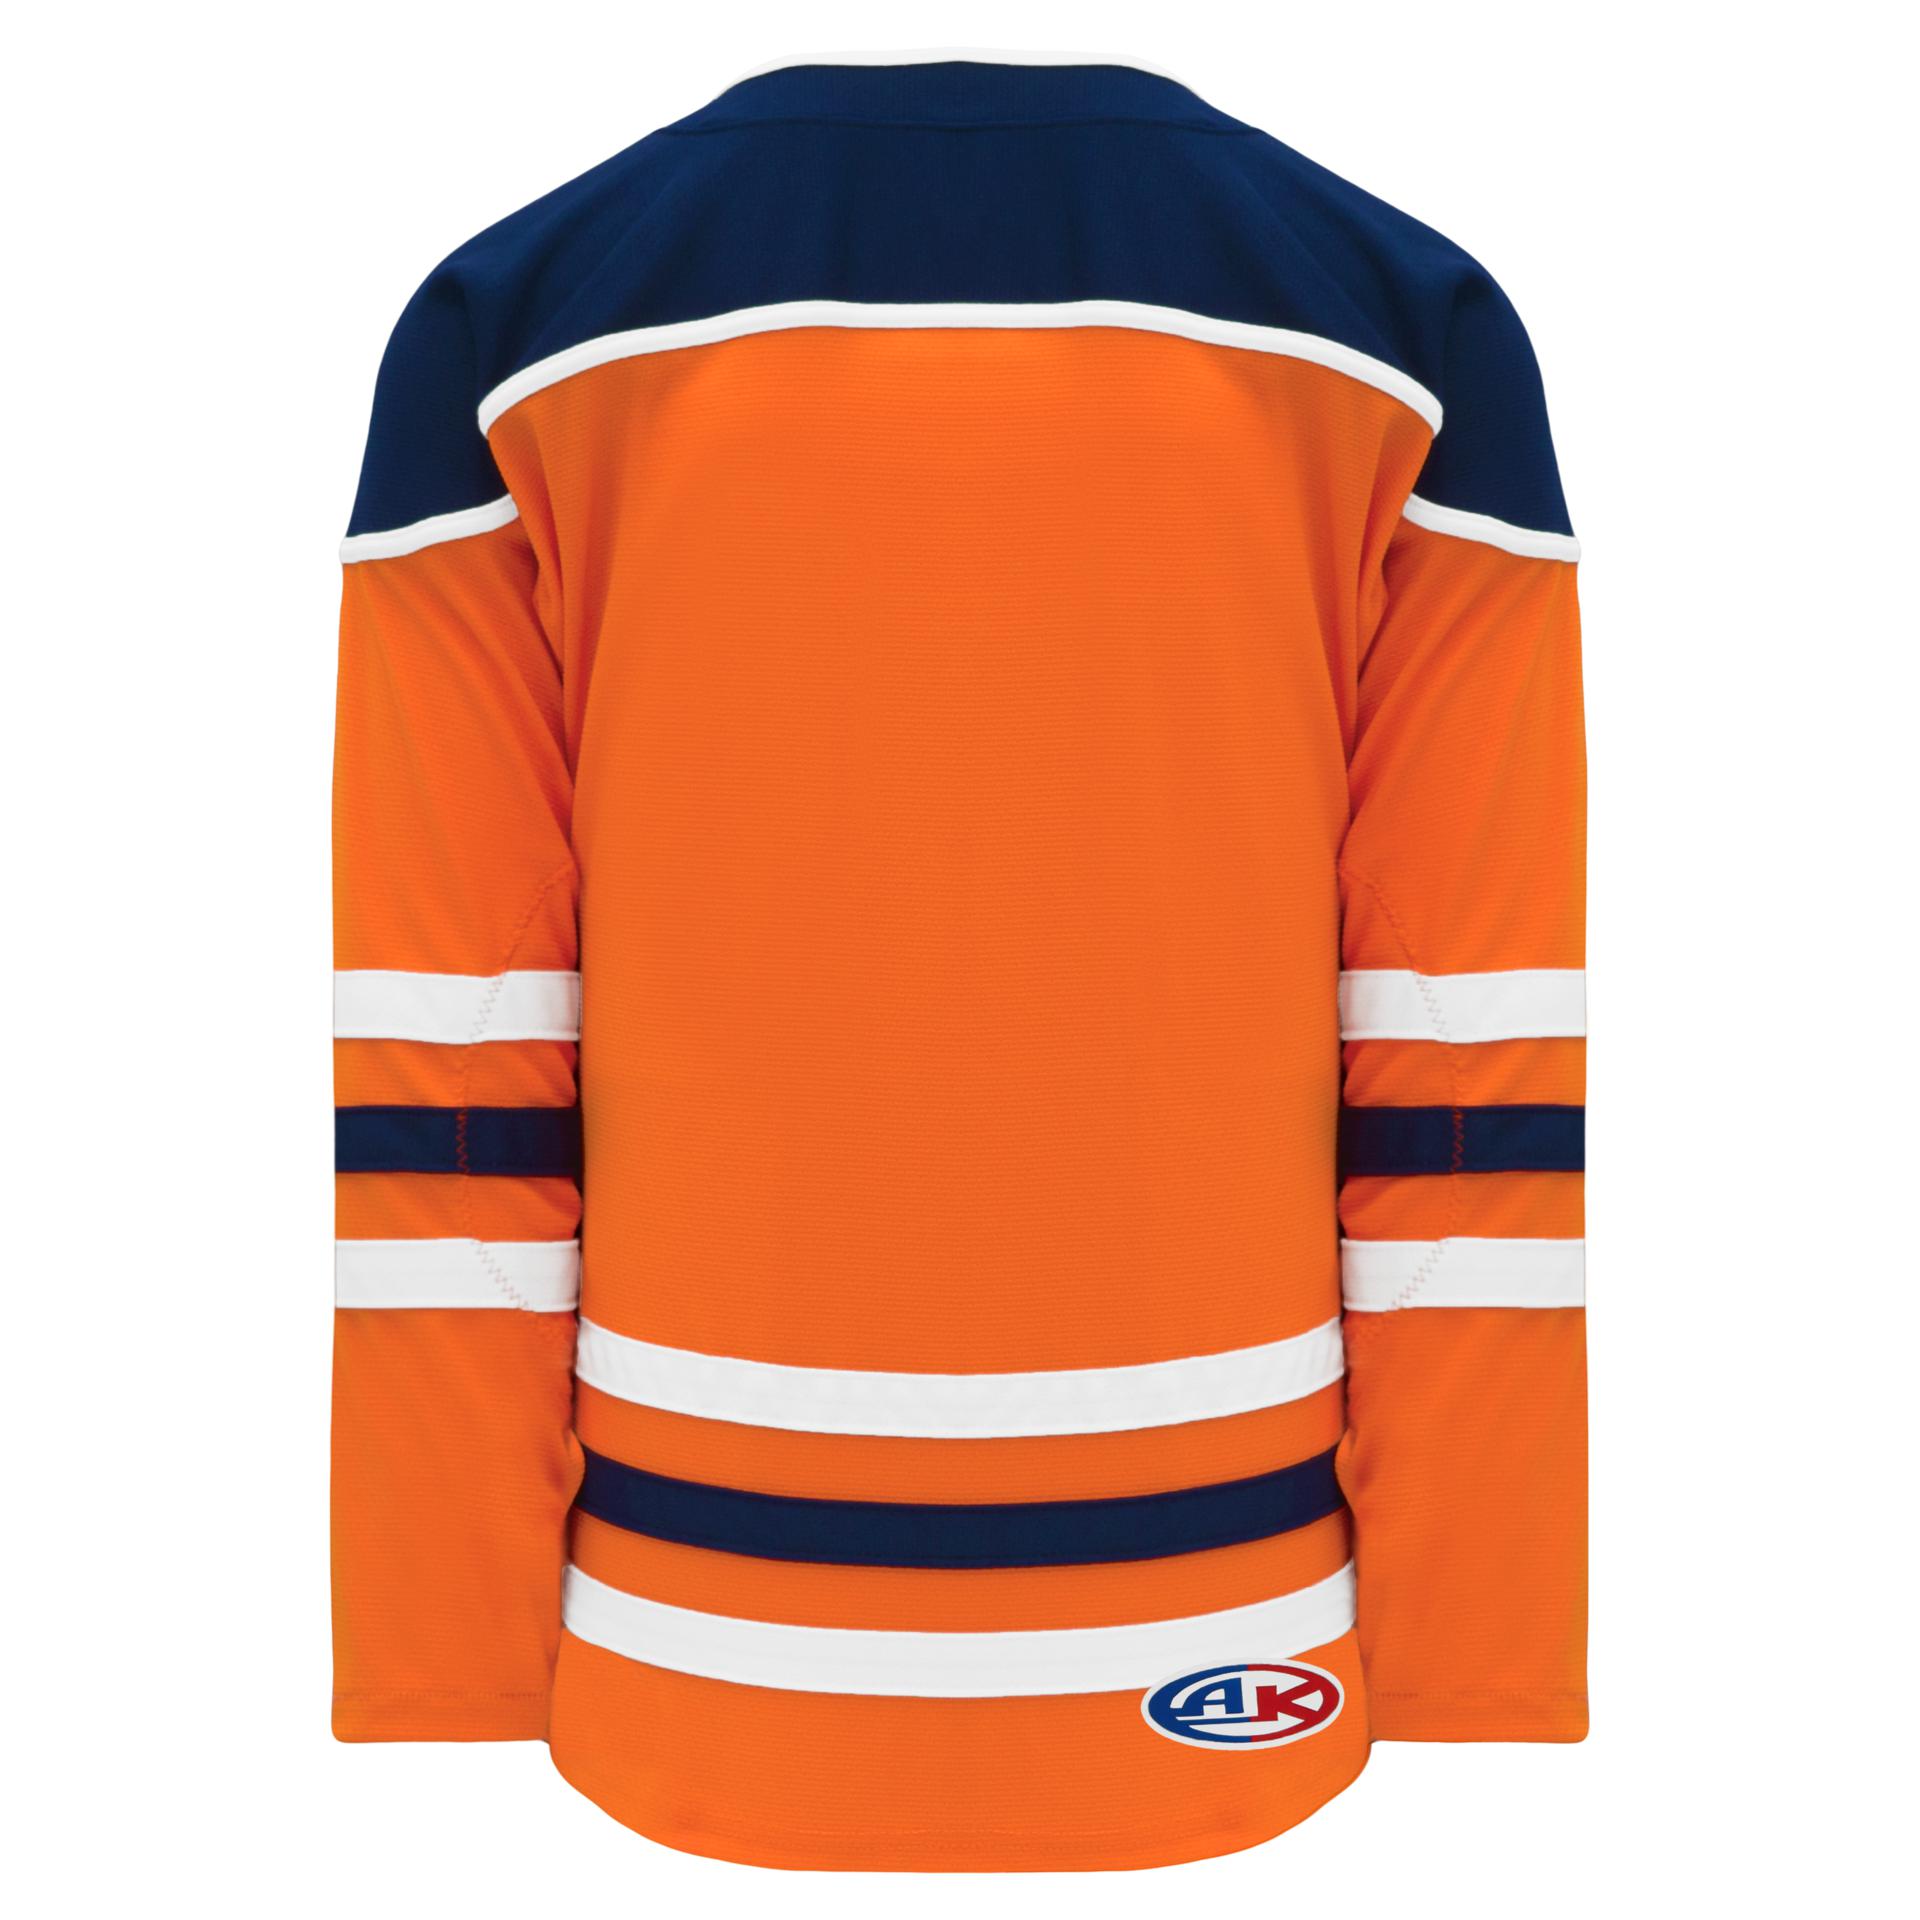 oilers jersey